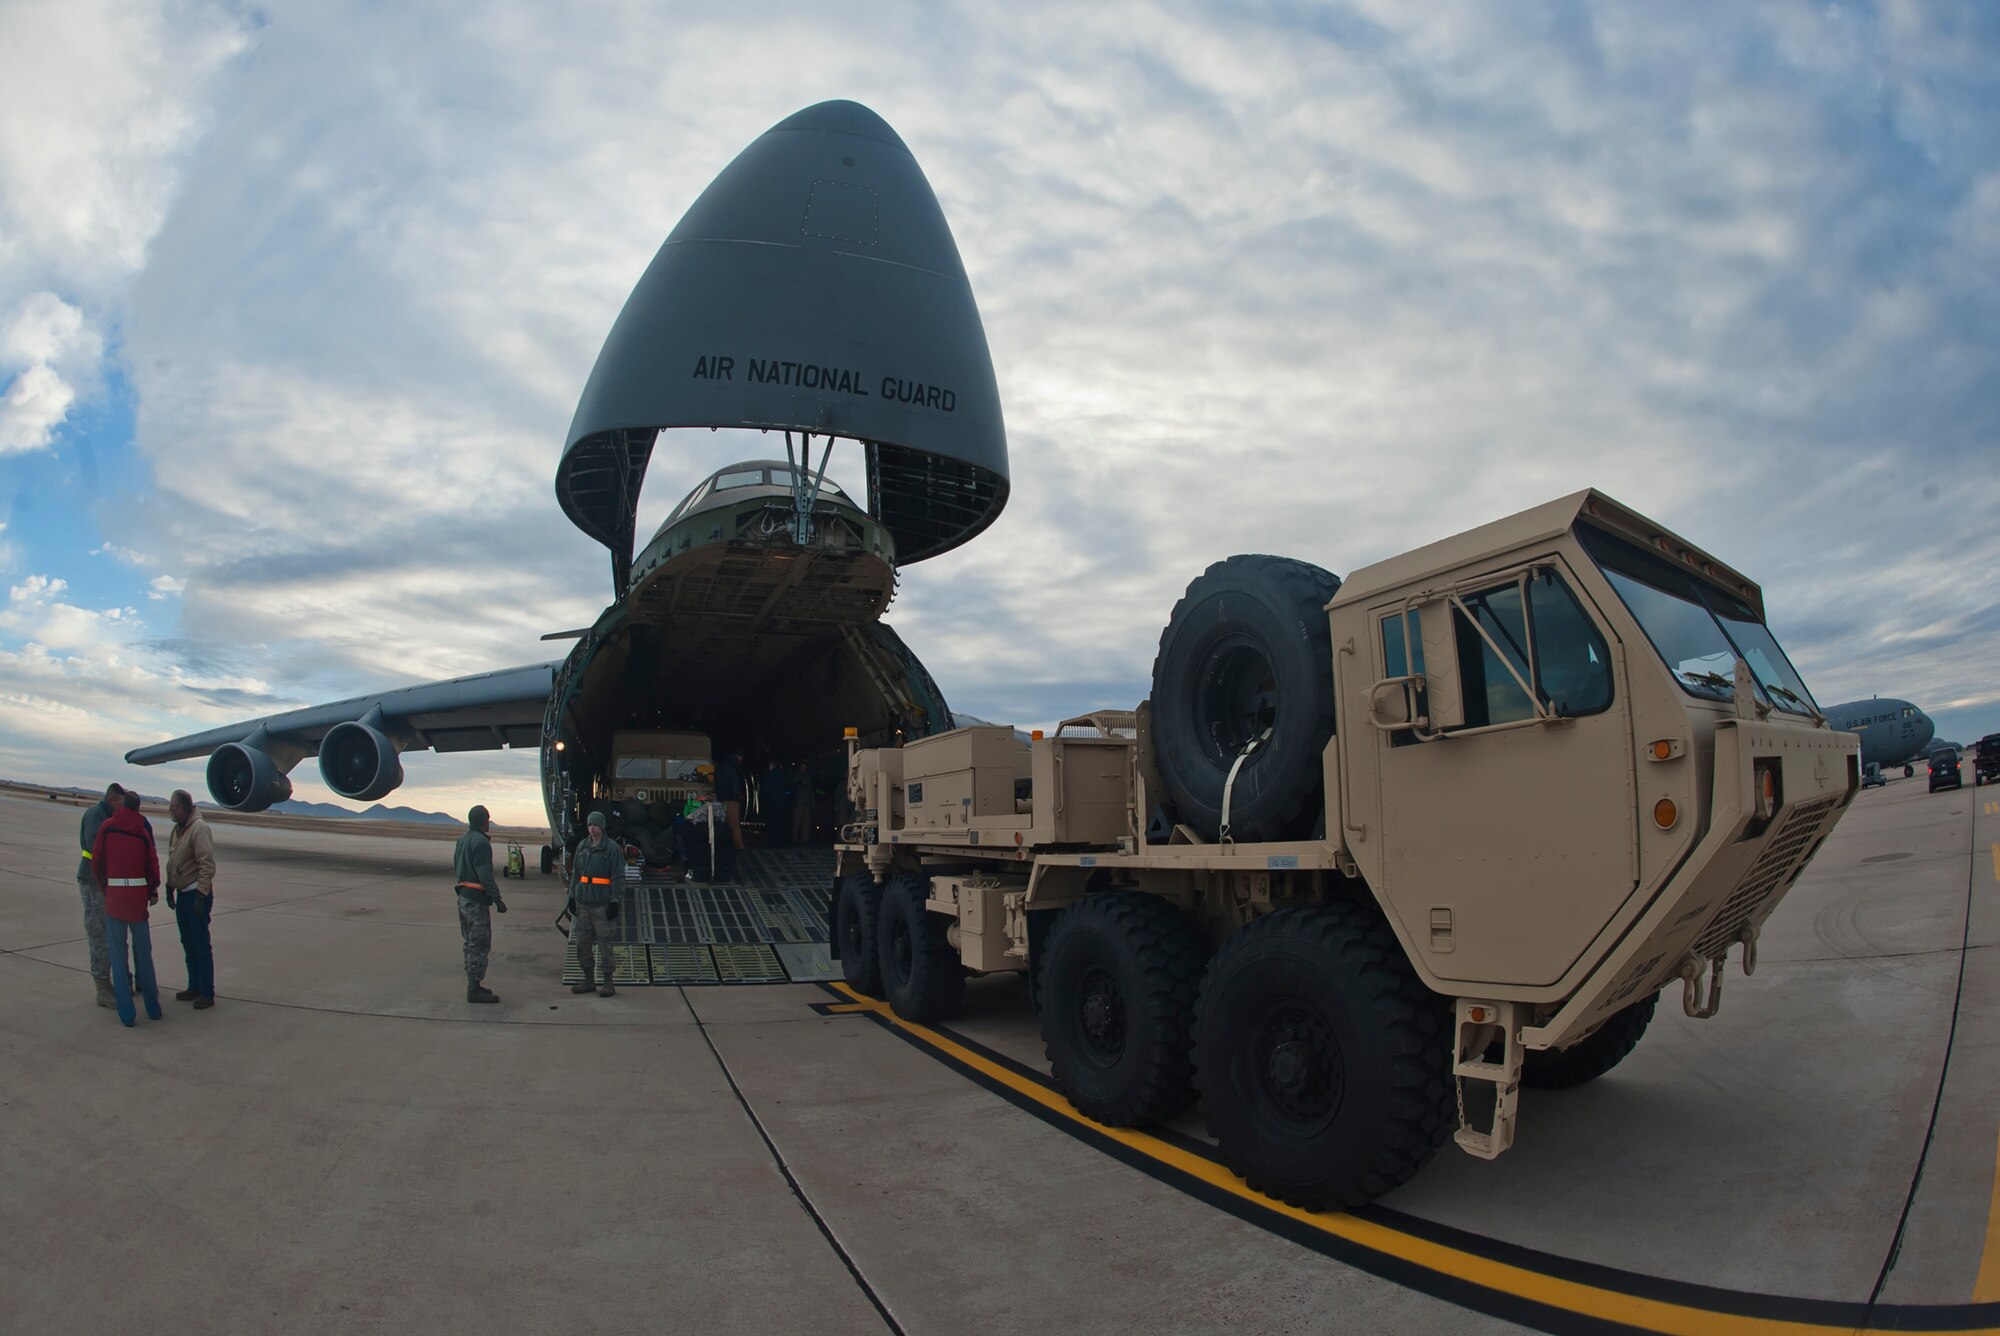 ALTUS AIR FORCE BASE, Okla. – Members of the 97th Air Mobility Wing, Kentucky Air Guard Contingency Response Group, 31st Air Defense Artillery Army Brigade, Fort Sill, Okla. and 167th Airlift Wing, Martinsburg, W. Va., unload an M984 Wrecker from a 167th AW C-5 Galaxy on the Altus AFB flight line, Jan. 4, 2013. The units joined forces to deploy batteries of Patriot-air-defense systems, more than two million pounds of equipment and about 300 personnel from 3-2 Air Defense Artillery Battalion to Turkey in support of the North Atlantic Treaty Organization. (U.S. Air Force photo by Airman 1st Class Levin Boland / Released)